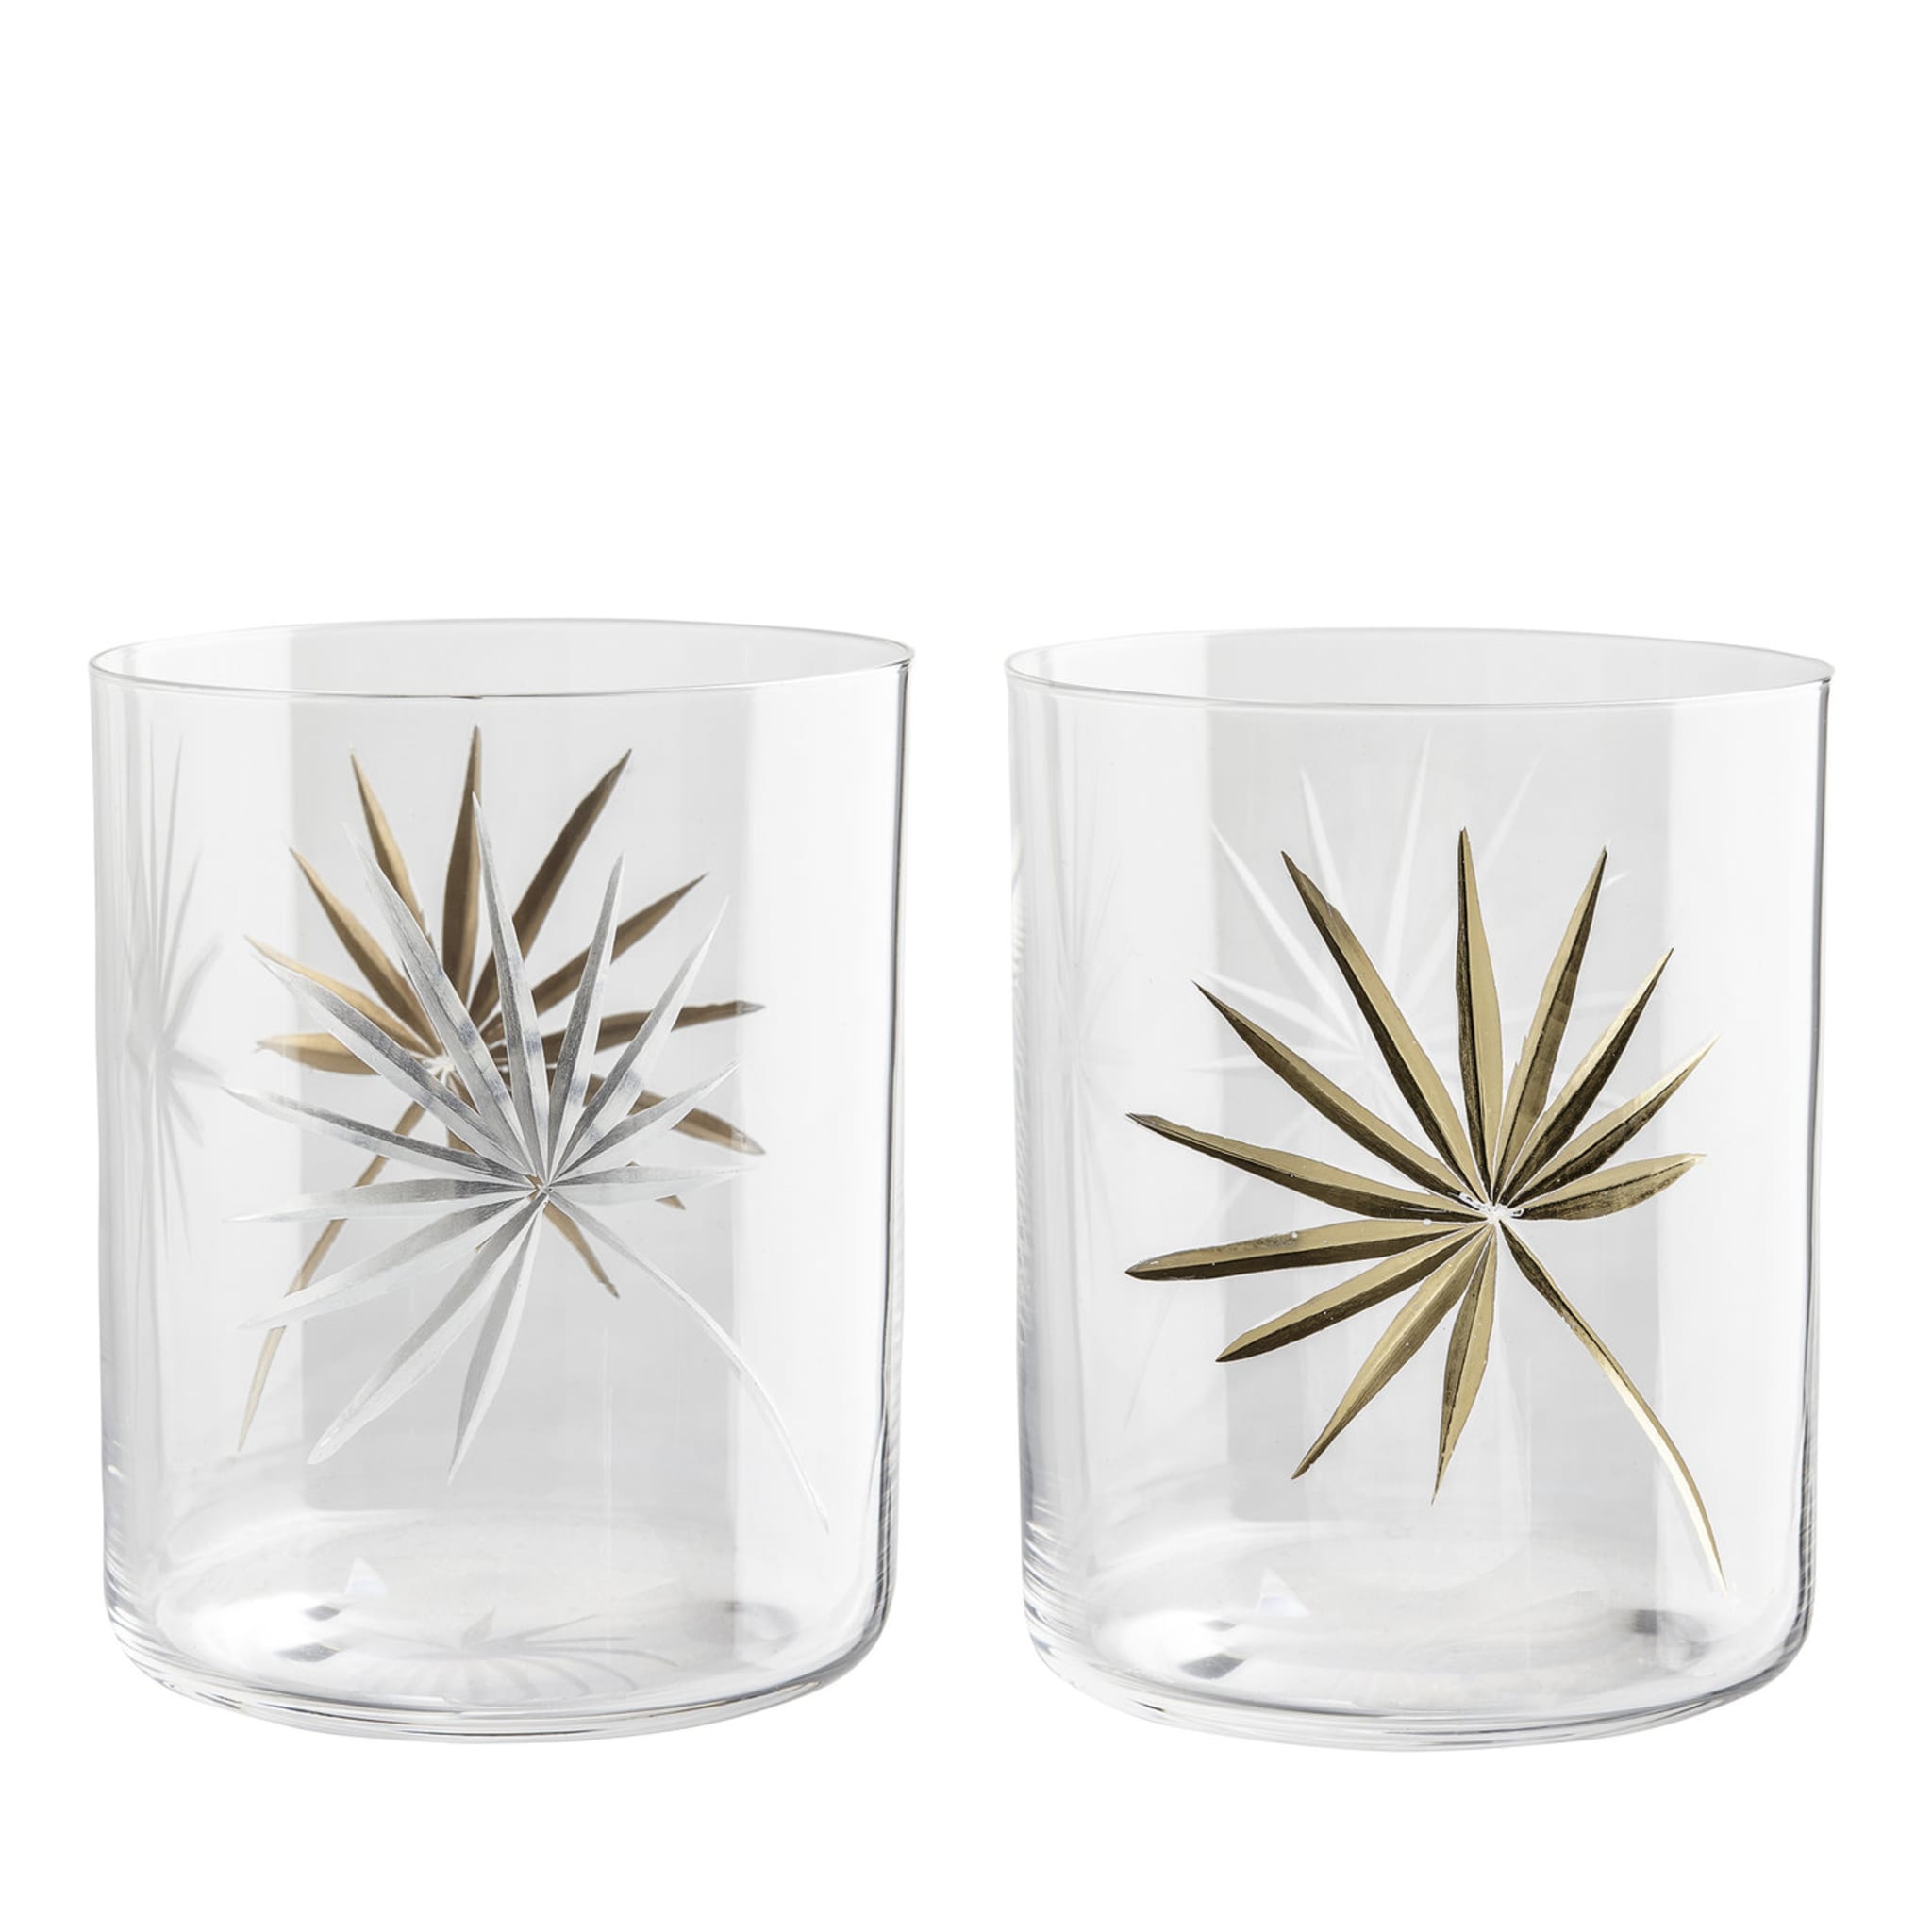 Set of 2 Double Palm Glasses - Main view